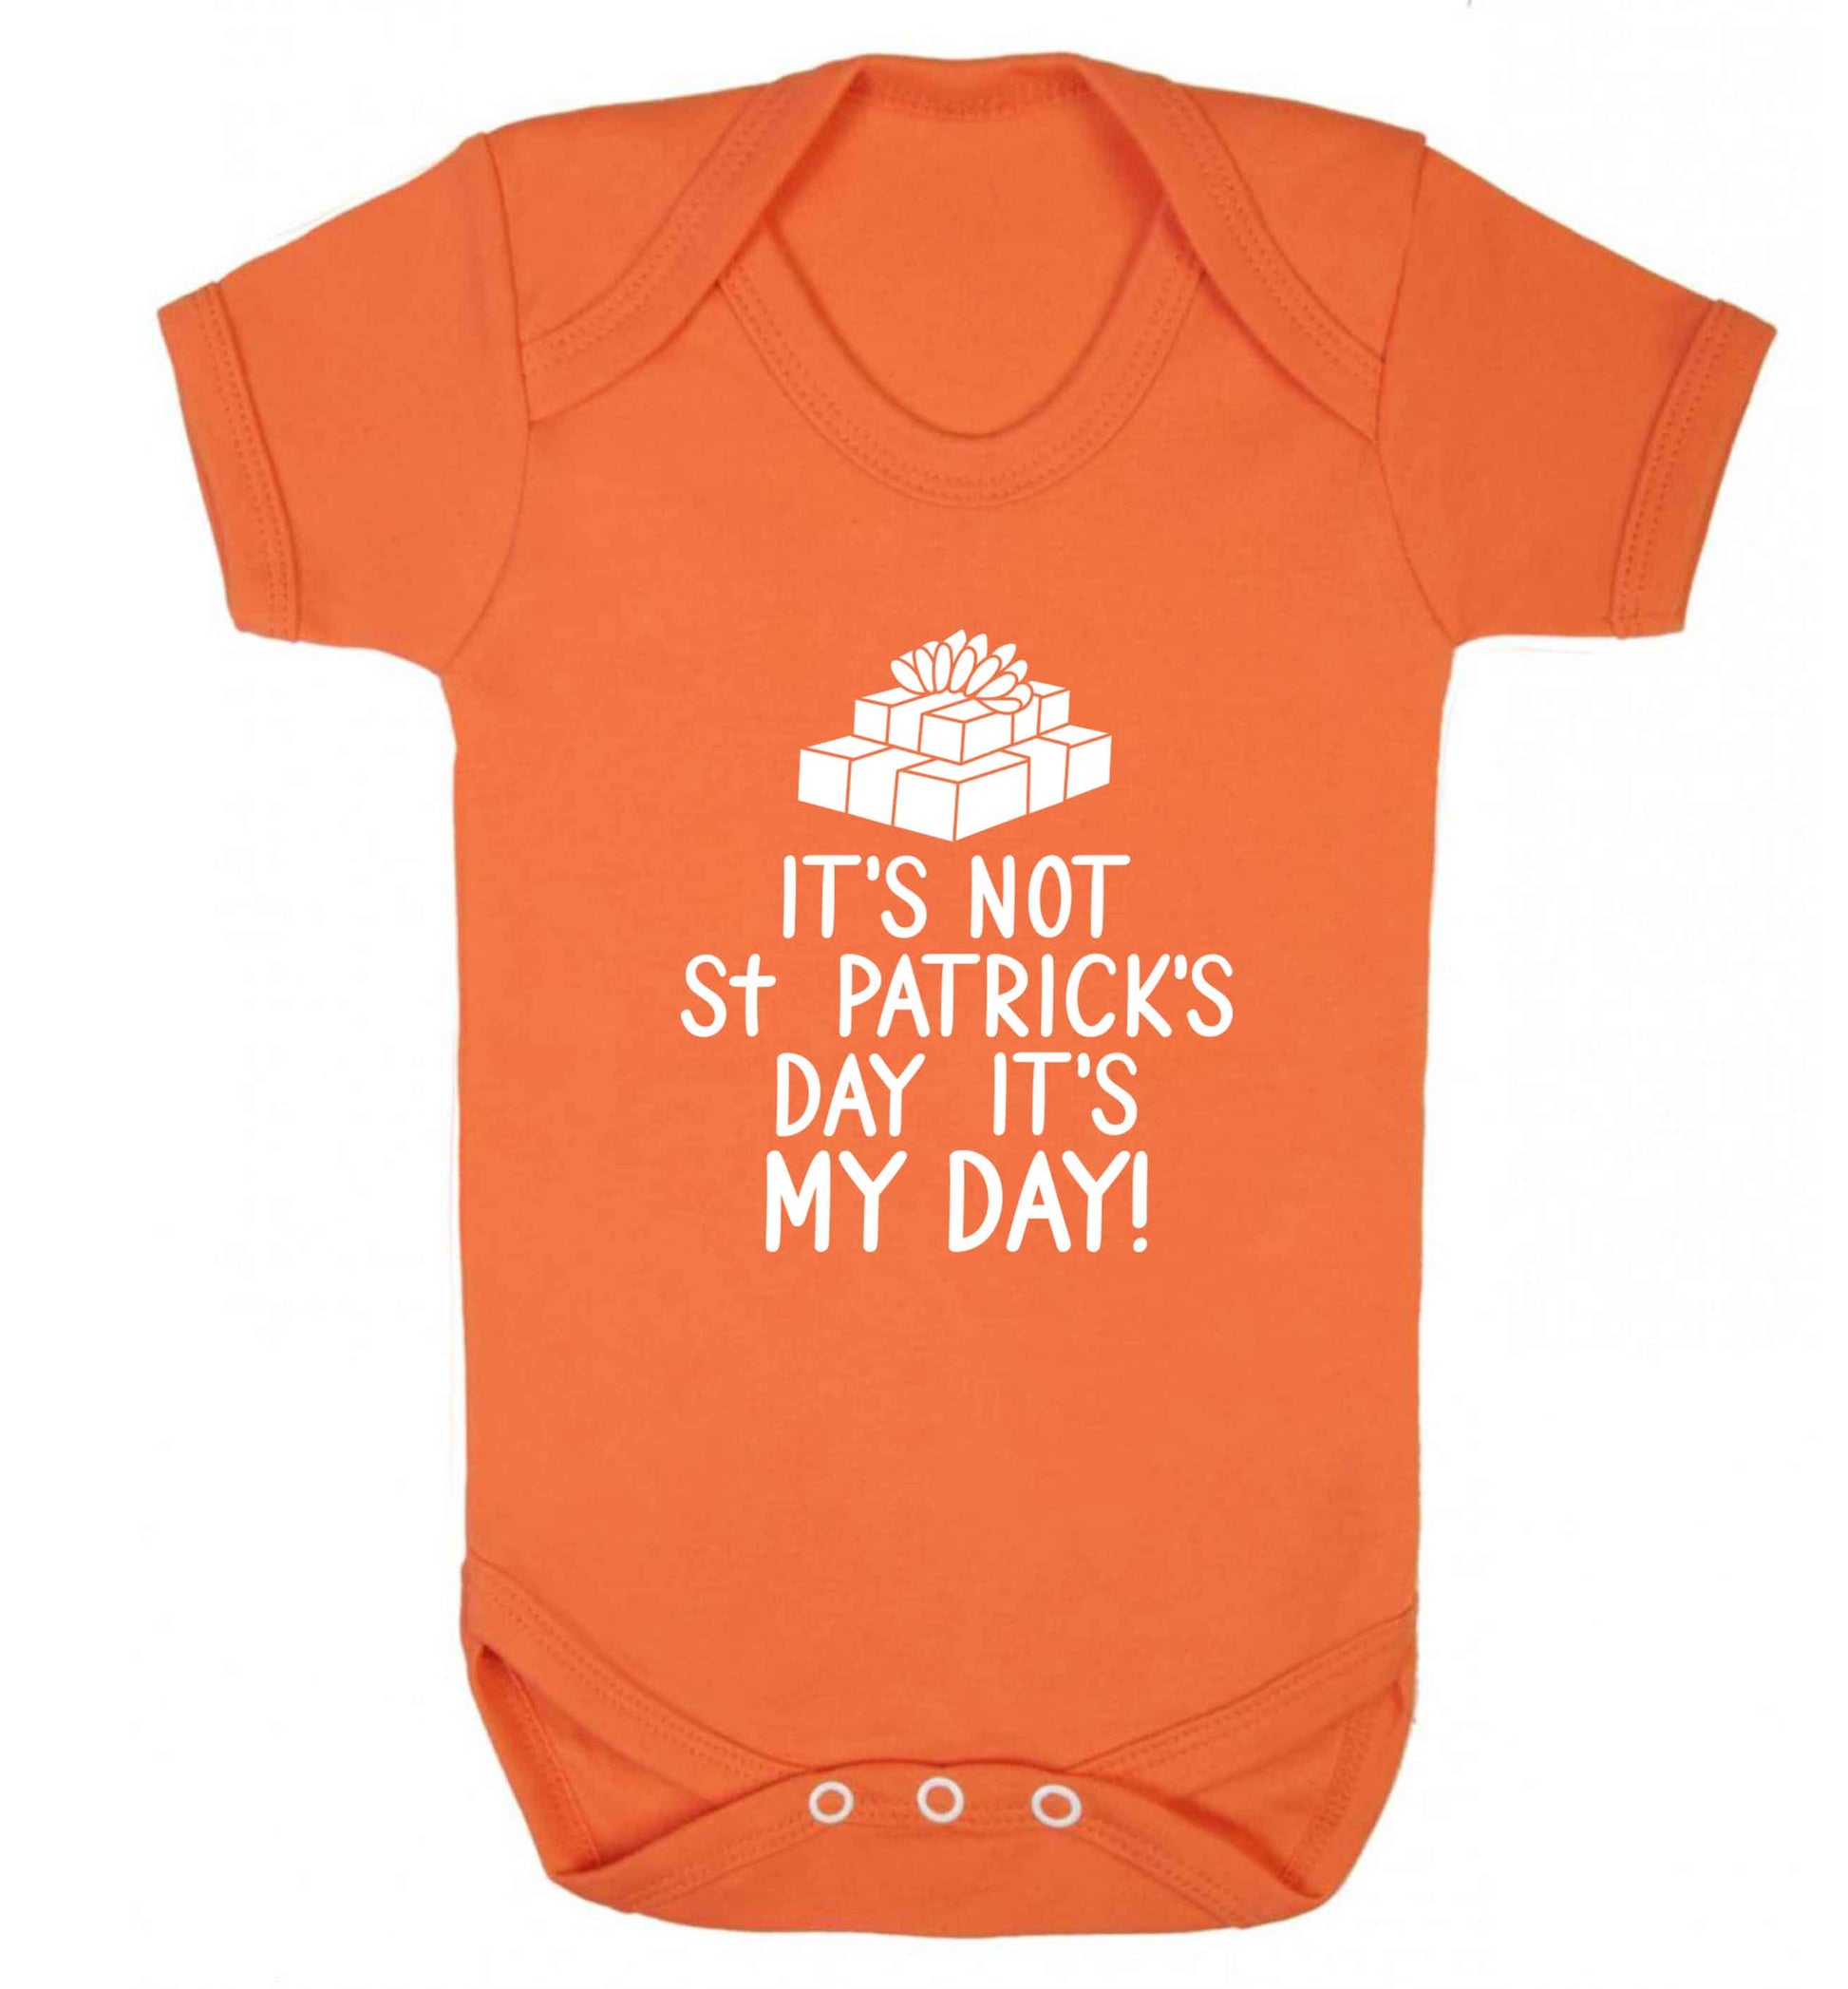 Funny gifts for your mum on mother's dayor her birthday! It's not St Patricks day it's my day baby vest orange 18-24 months